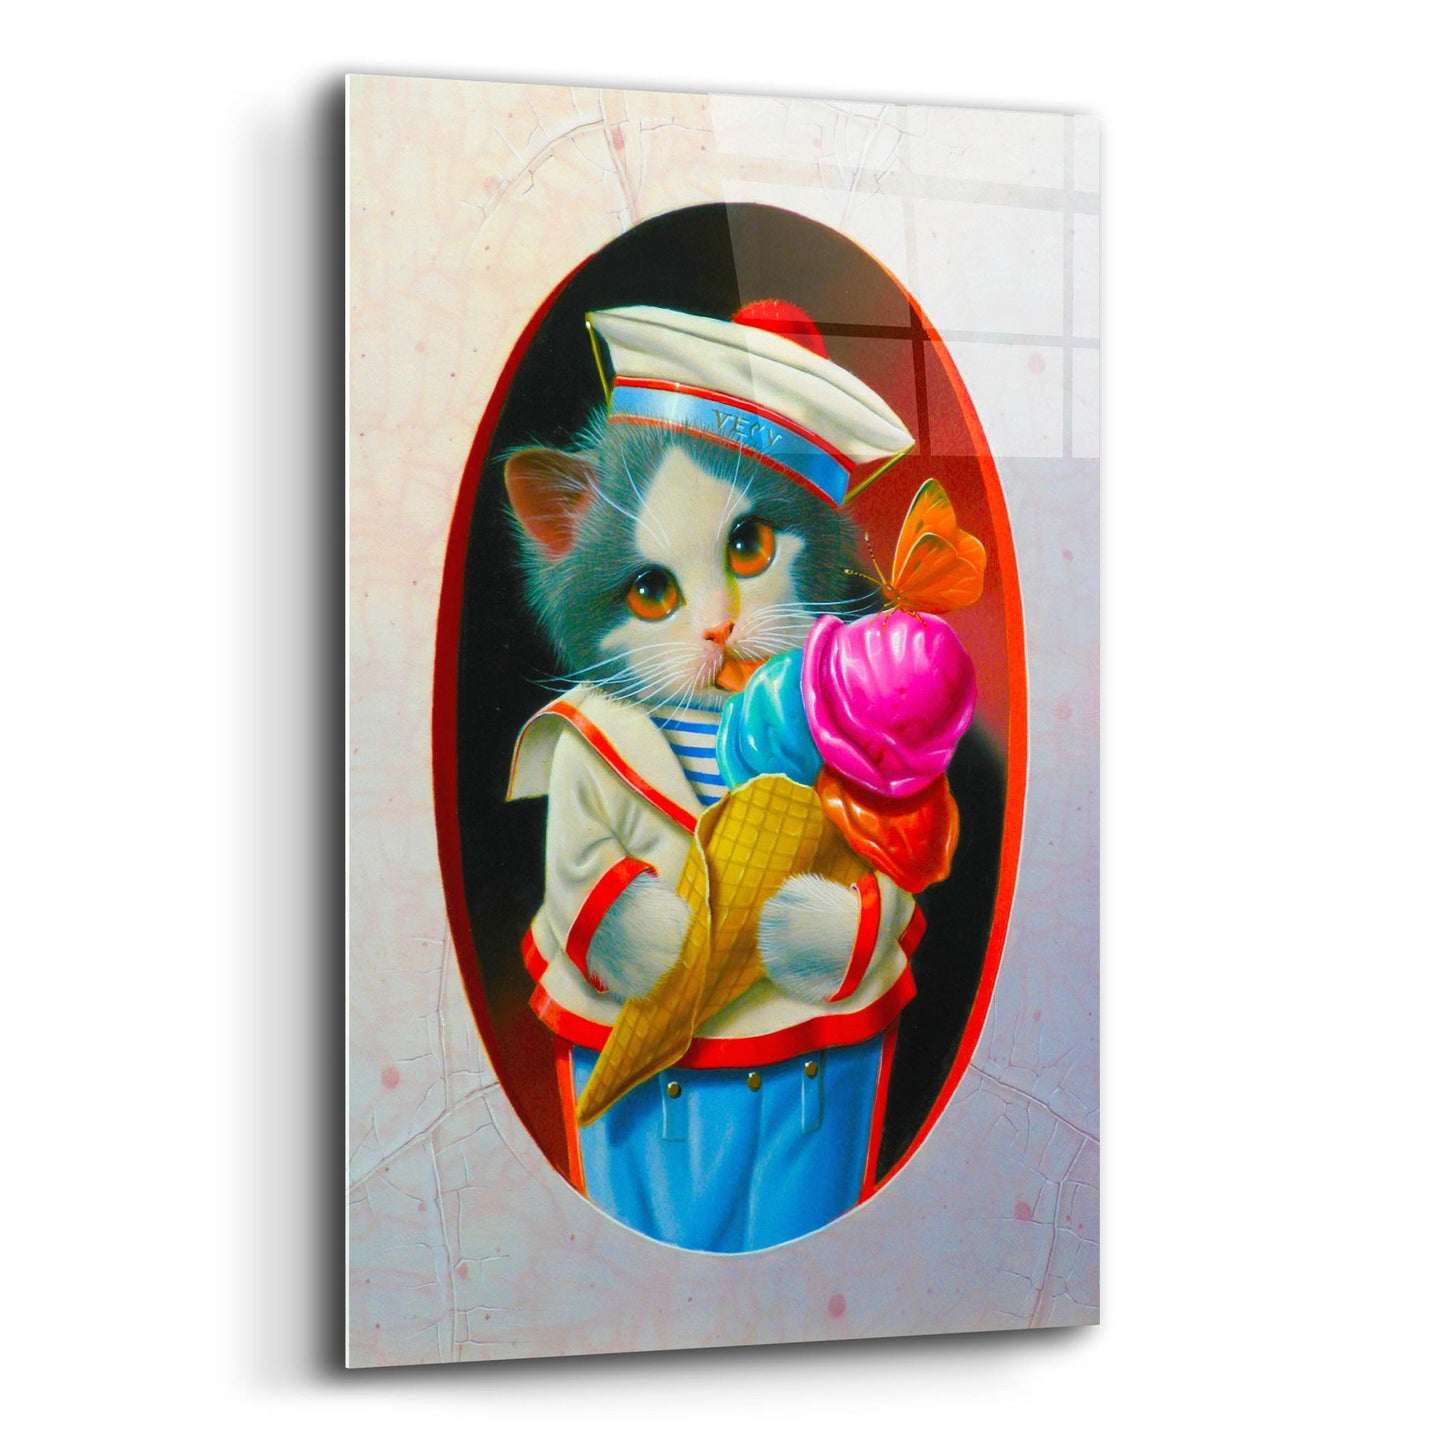 Epic Art 'The Ice Cream Cone' by Valery Vecu Quitard, Acrylic Glass Wall Art,12x16